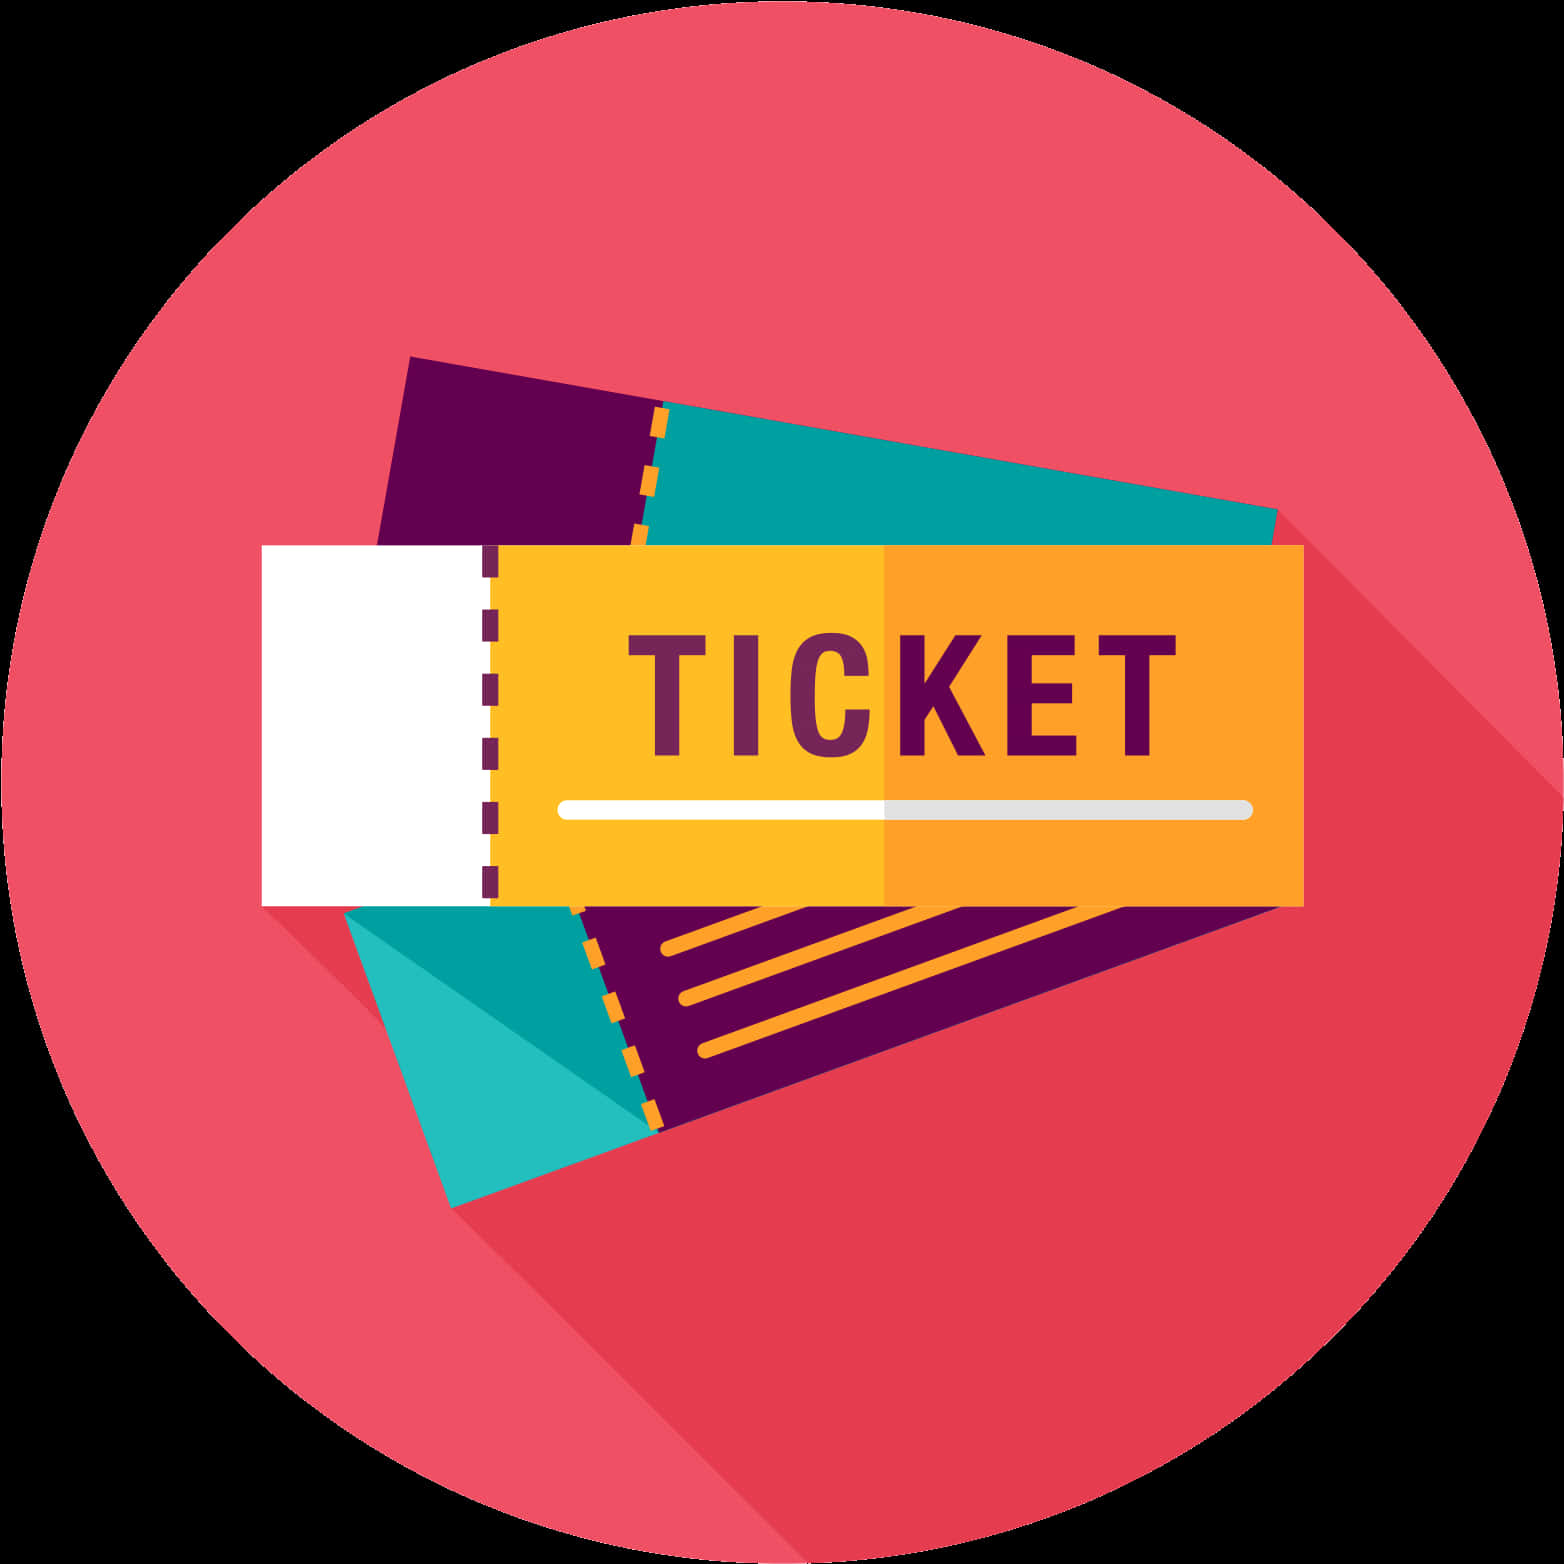 Colorful Event Ticket Icon PNG image